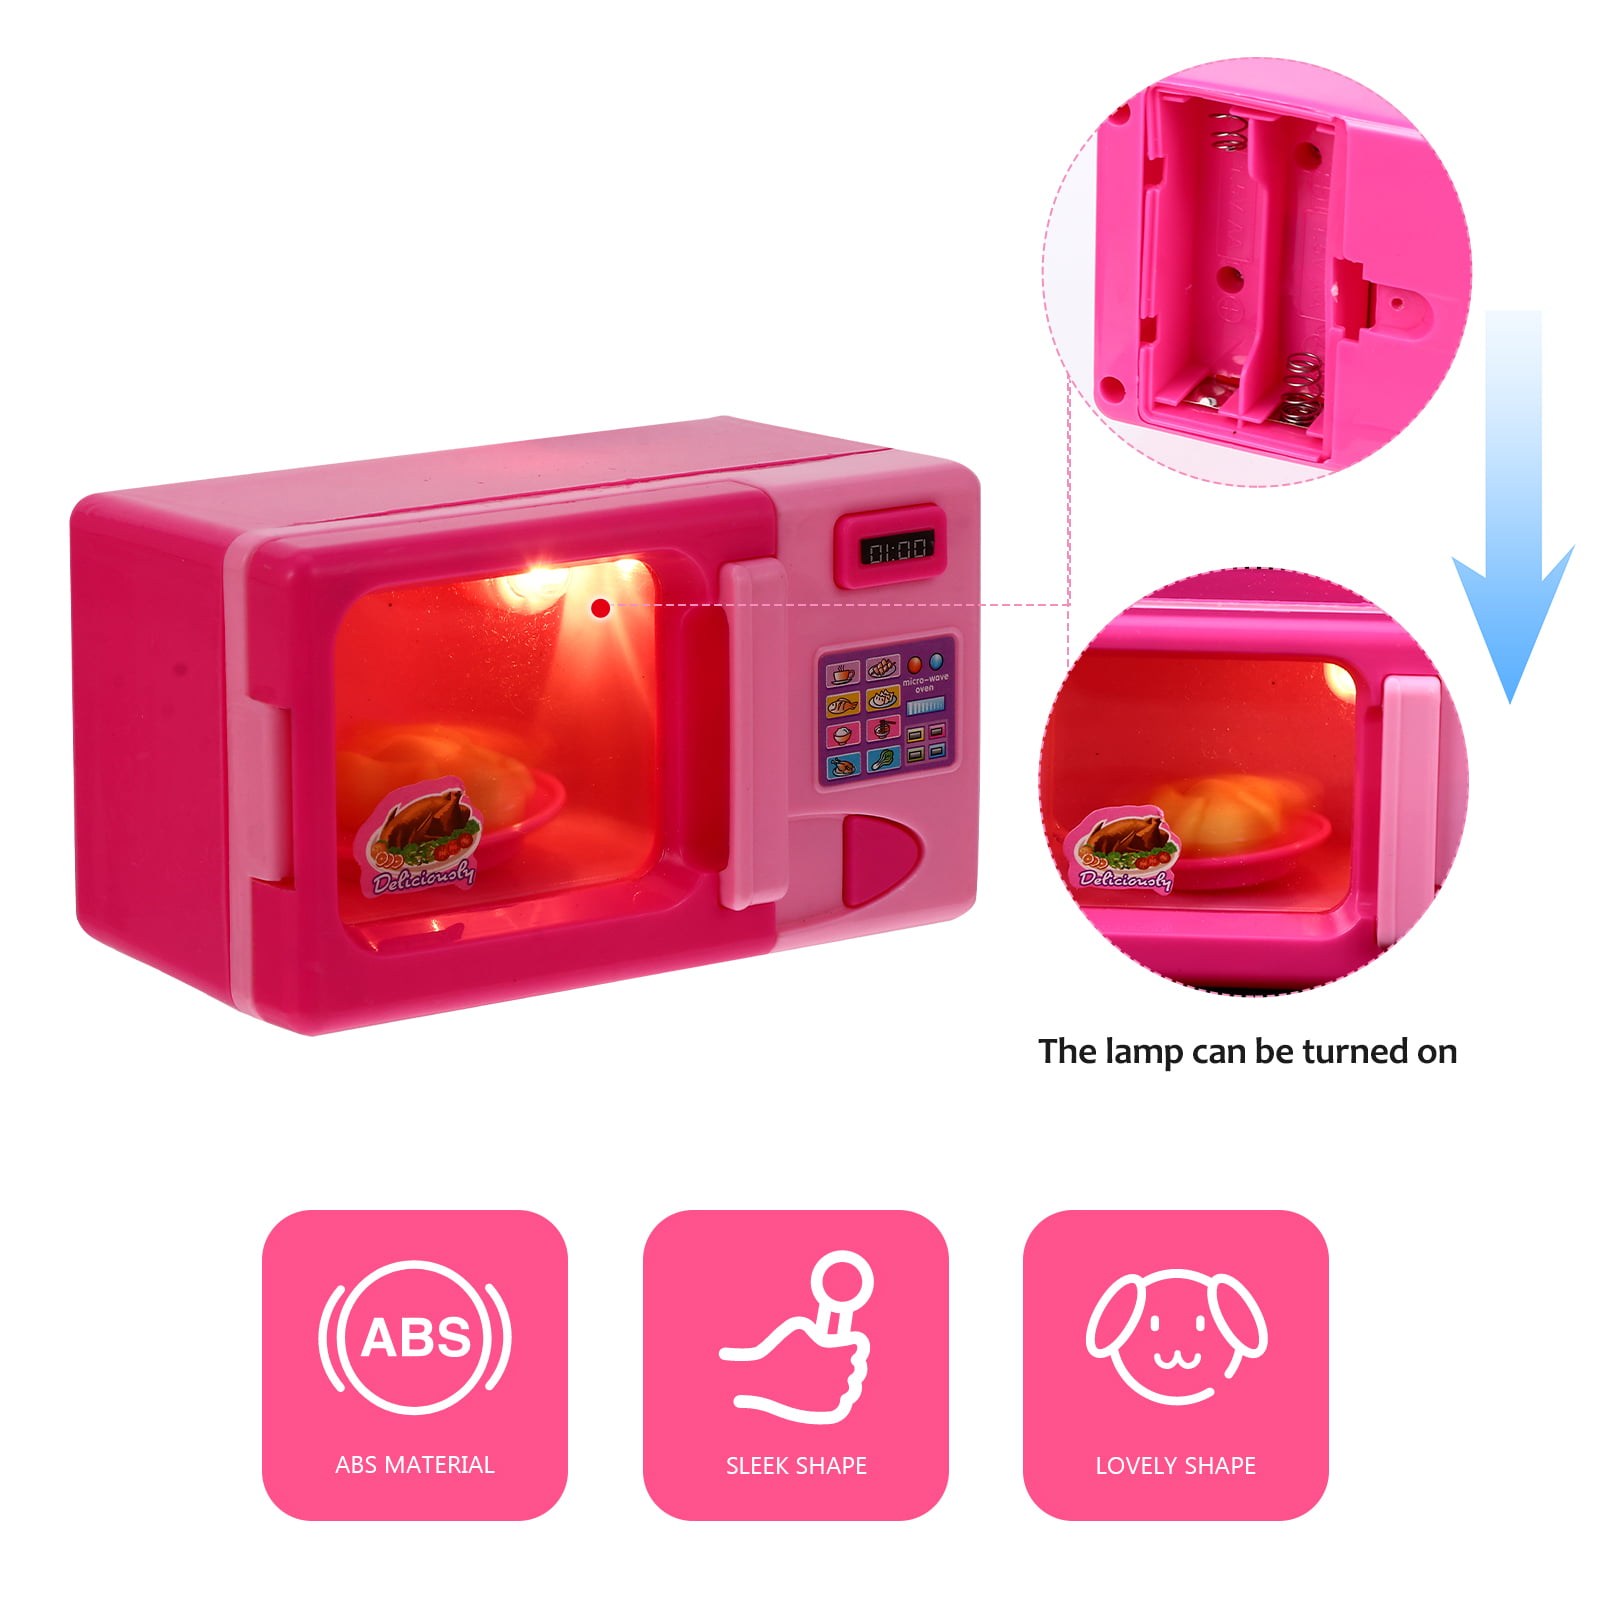 Mini Microwave Oven Dolls House Toys for Play Toys- Pink